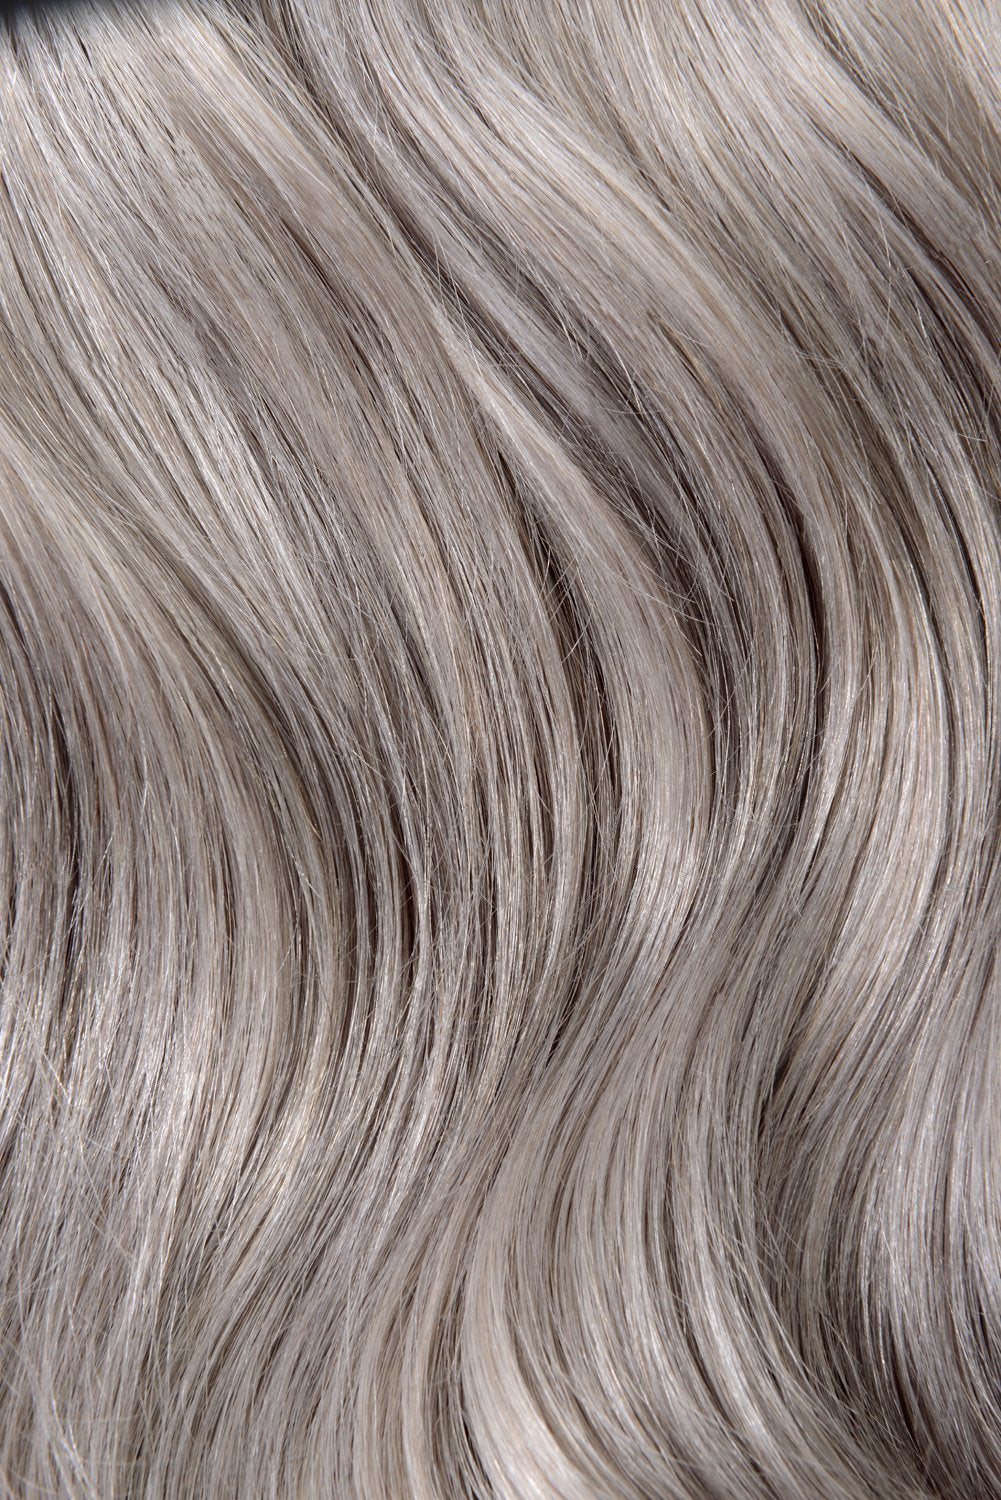 Double Wefted Full Head Remy Clip in Human Hair Extensions - Silver / Grey (#SG)